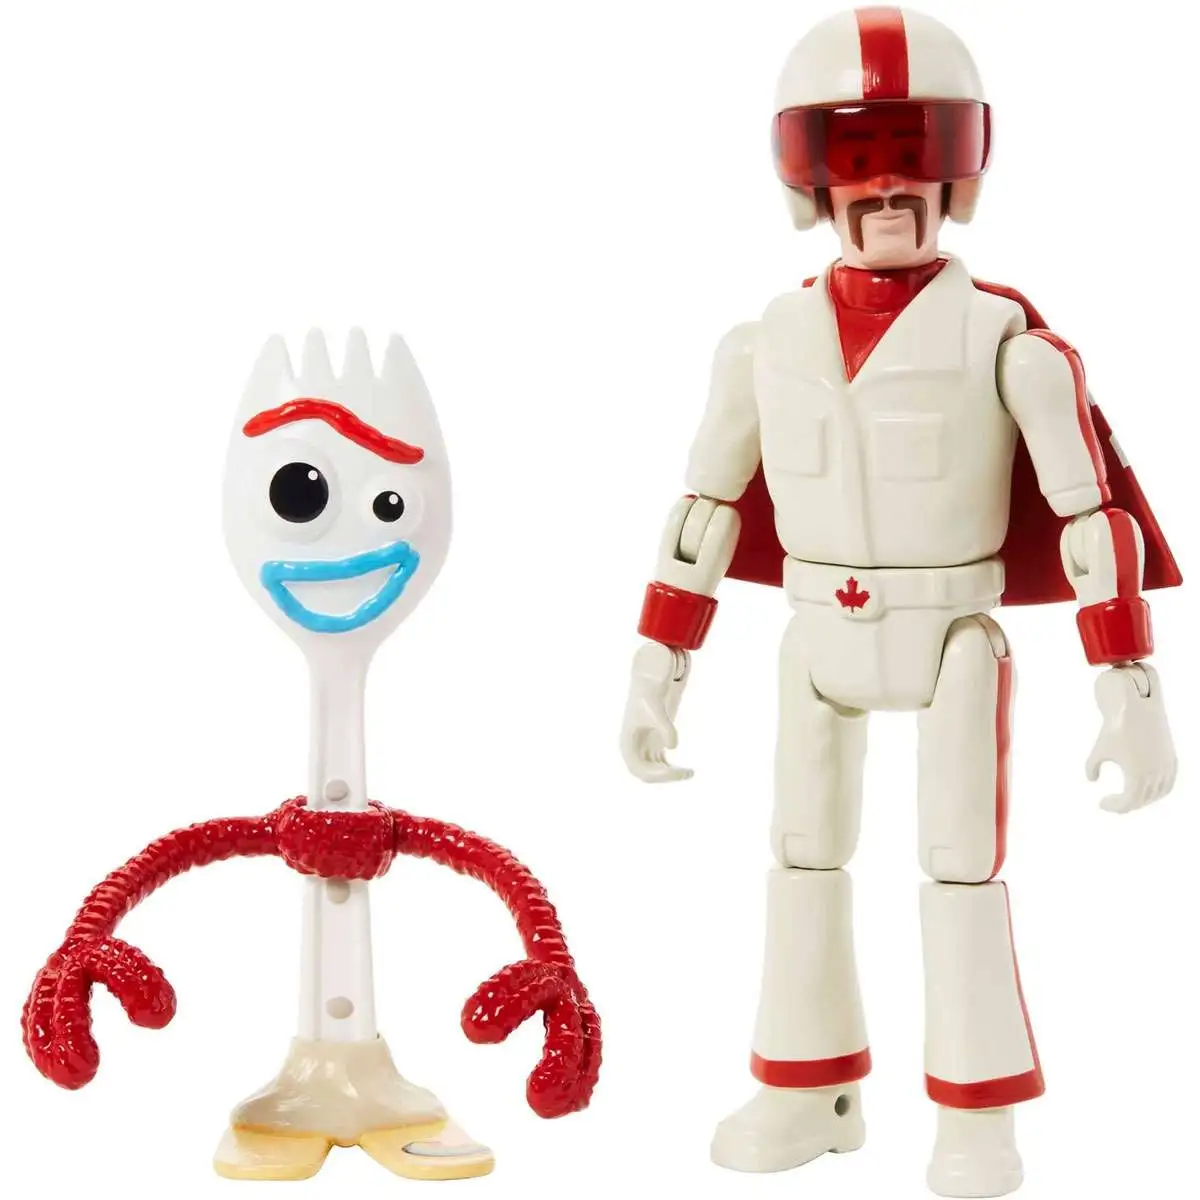 Disney Pixar Toy Story 4 Forky 8" Pull & Go Figure 2019 With Whacky Action! 